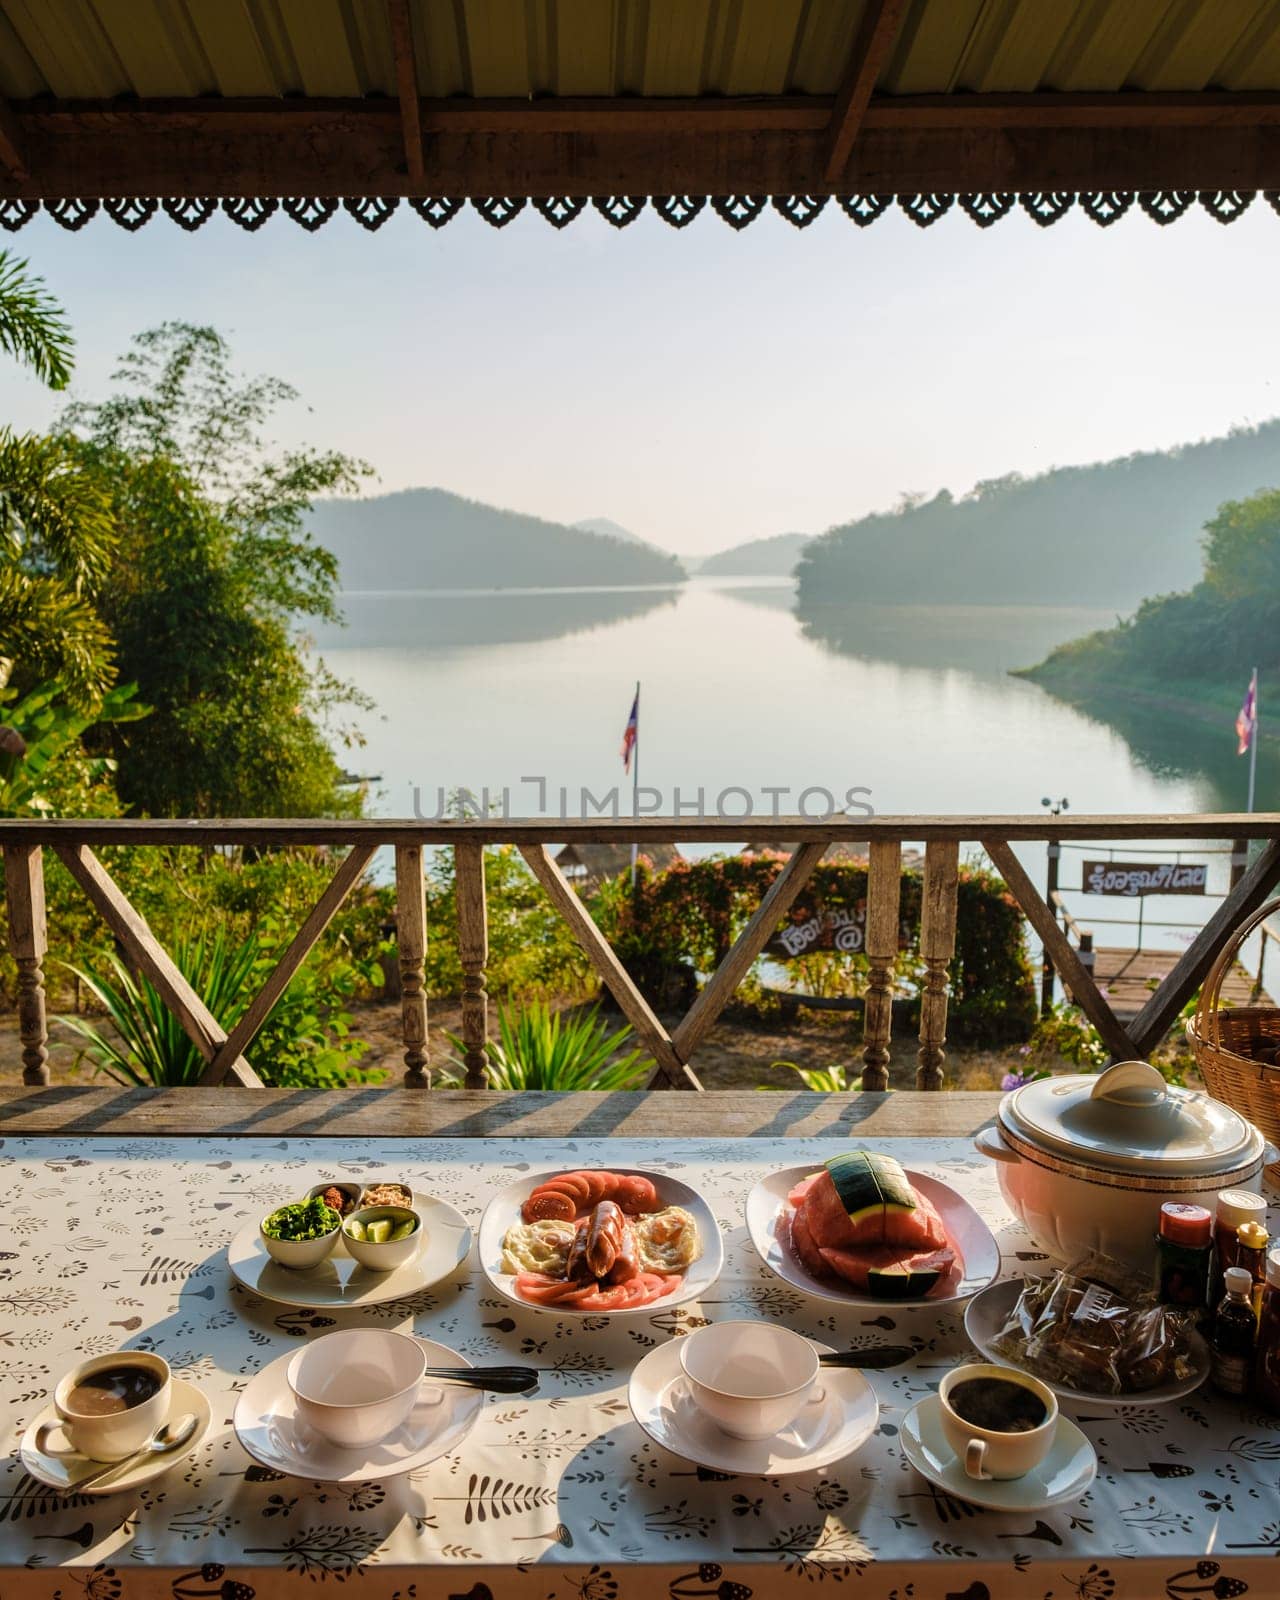 Breakfast view from a wooden bungalow with a view Huai Krathing lake in North Eastern Thailand Isaan by fokkebok